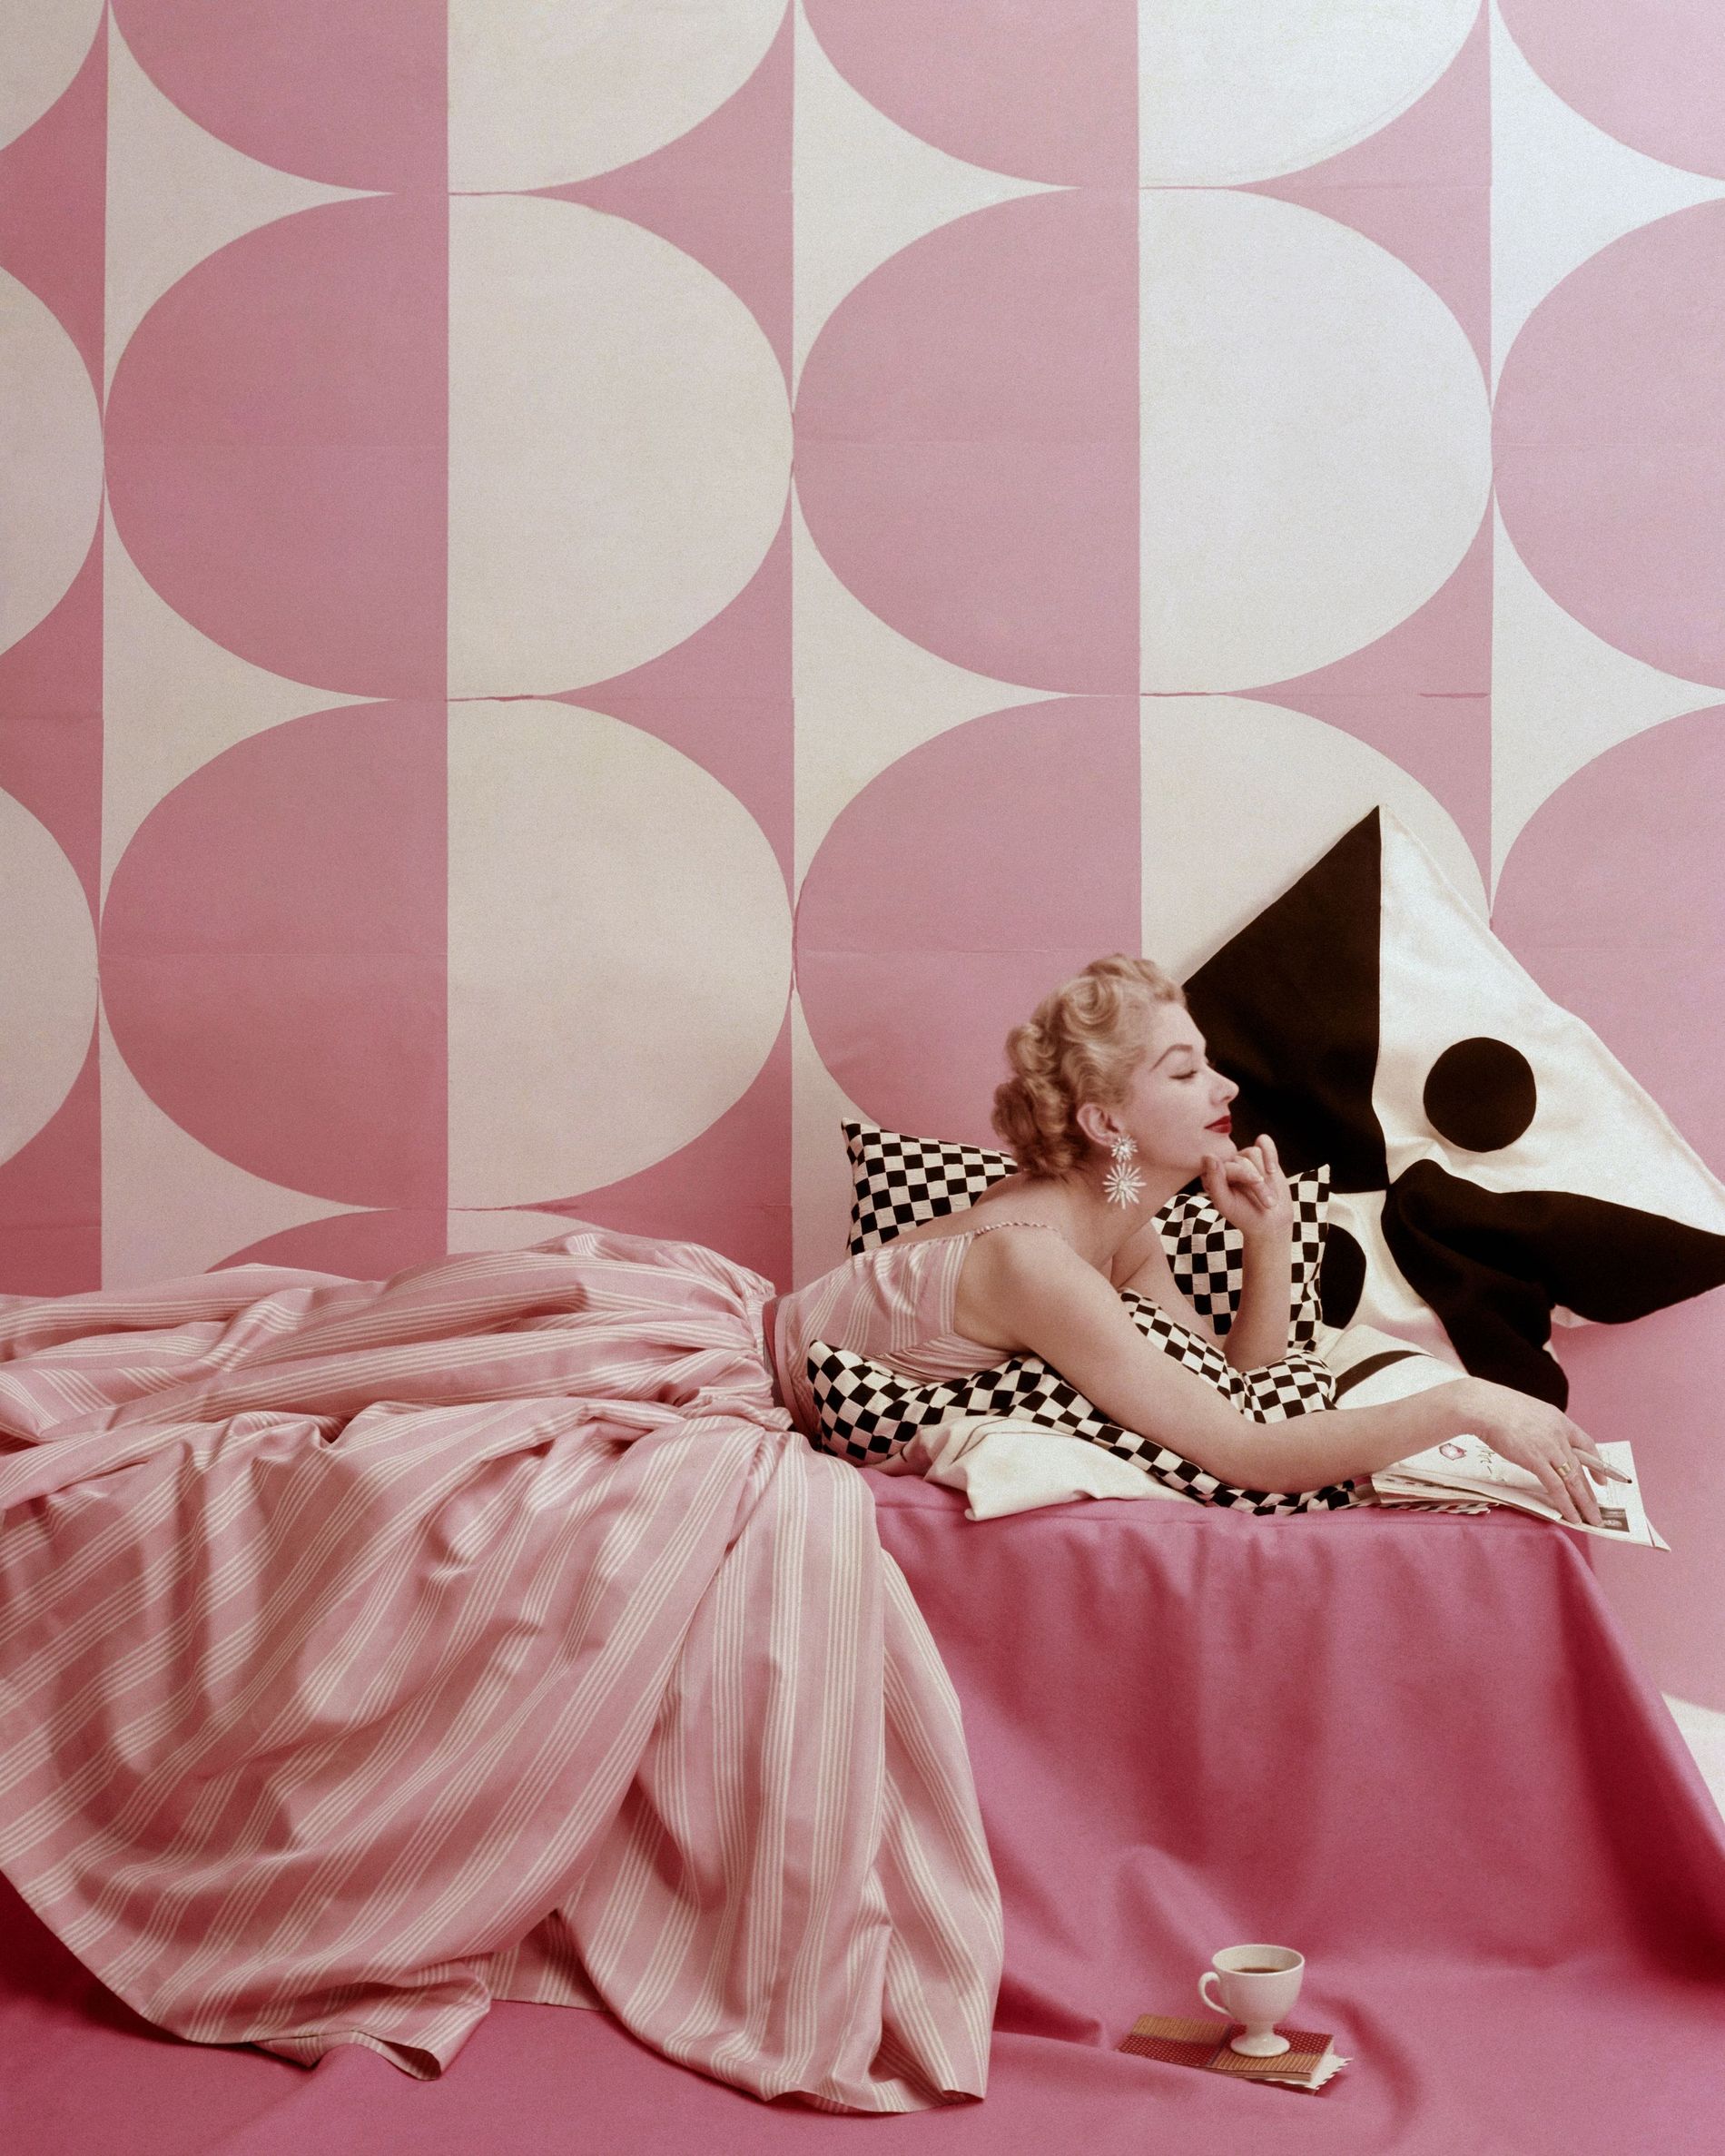 Model Lisa Fonssagrives lounging on bed, wearing Claire McCardell's pink and white striped dress